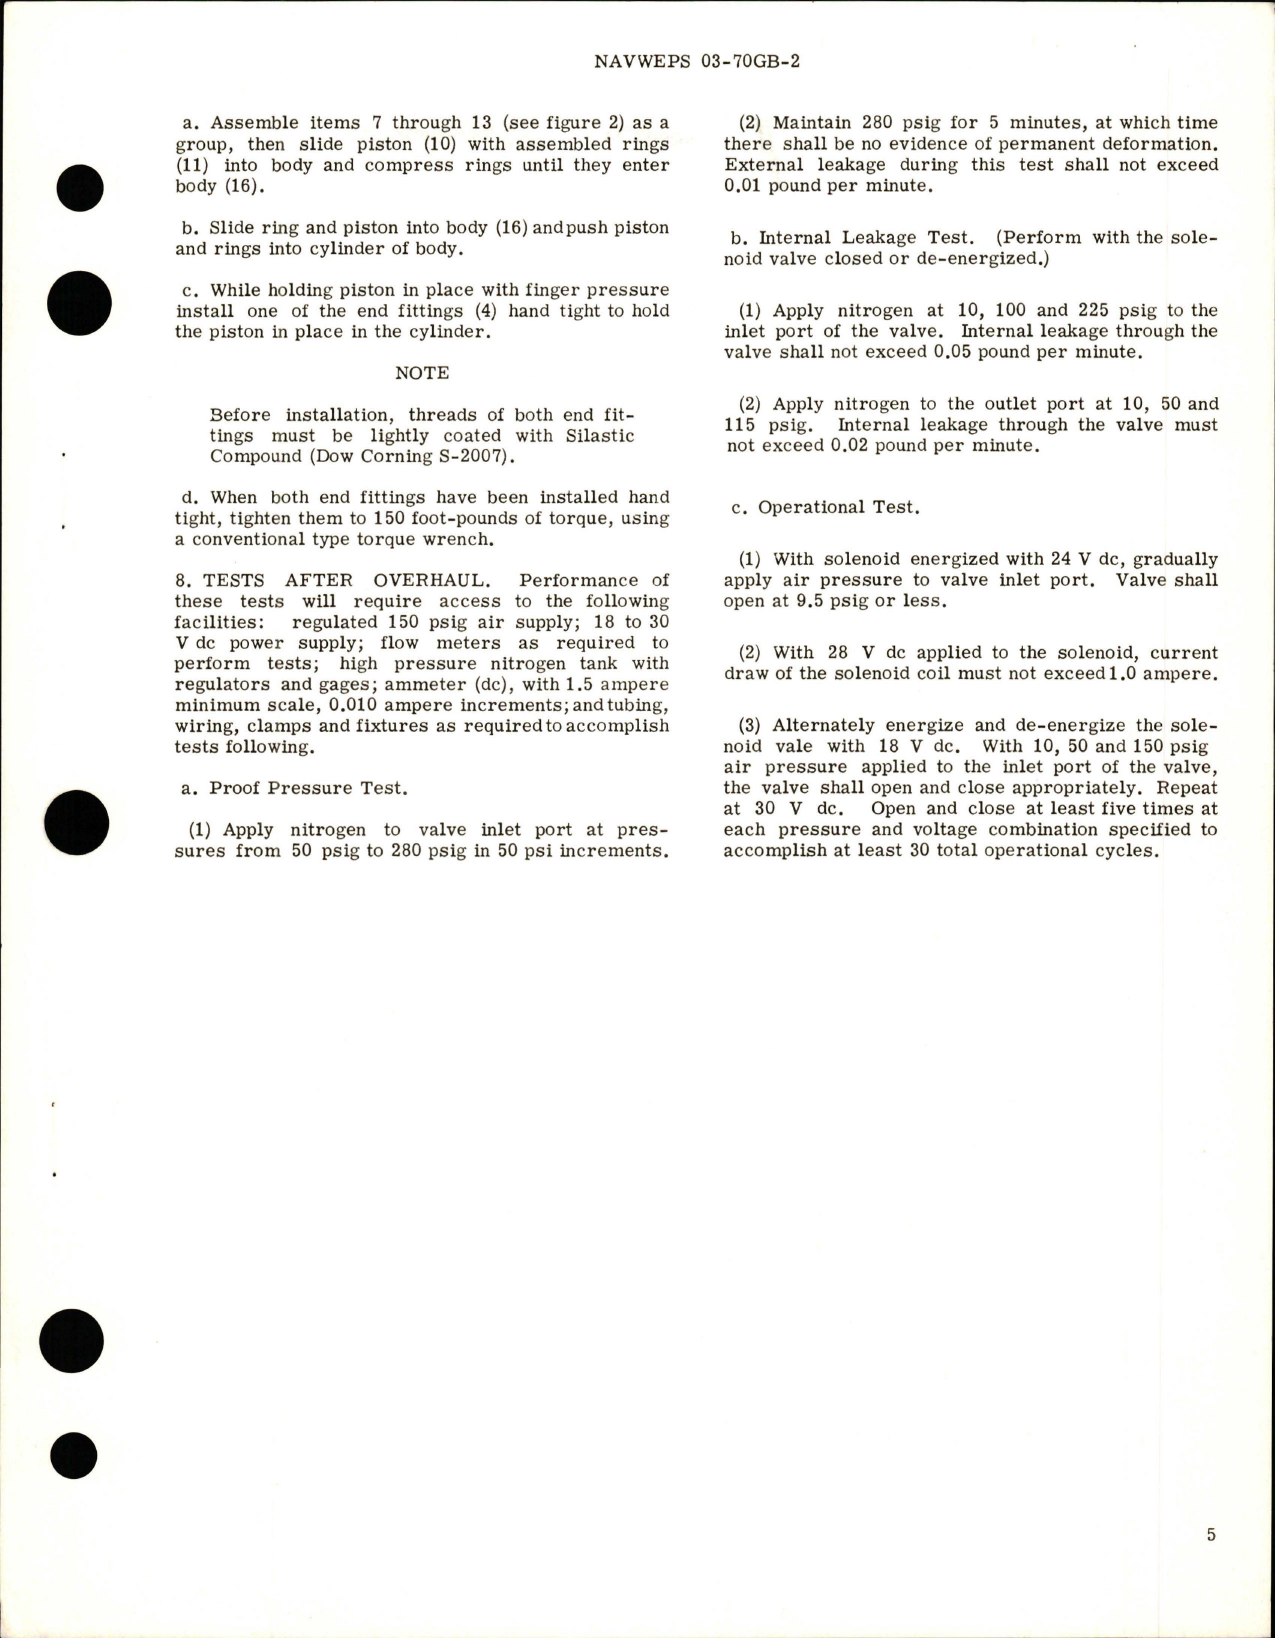 Sample page 5 from AirCorps Library document: Overhaul Instructions with Illustrated Parts Breakdown for 3 Inch Inline Valves - Parts 26040013 and 26040014